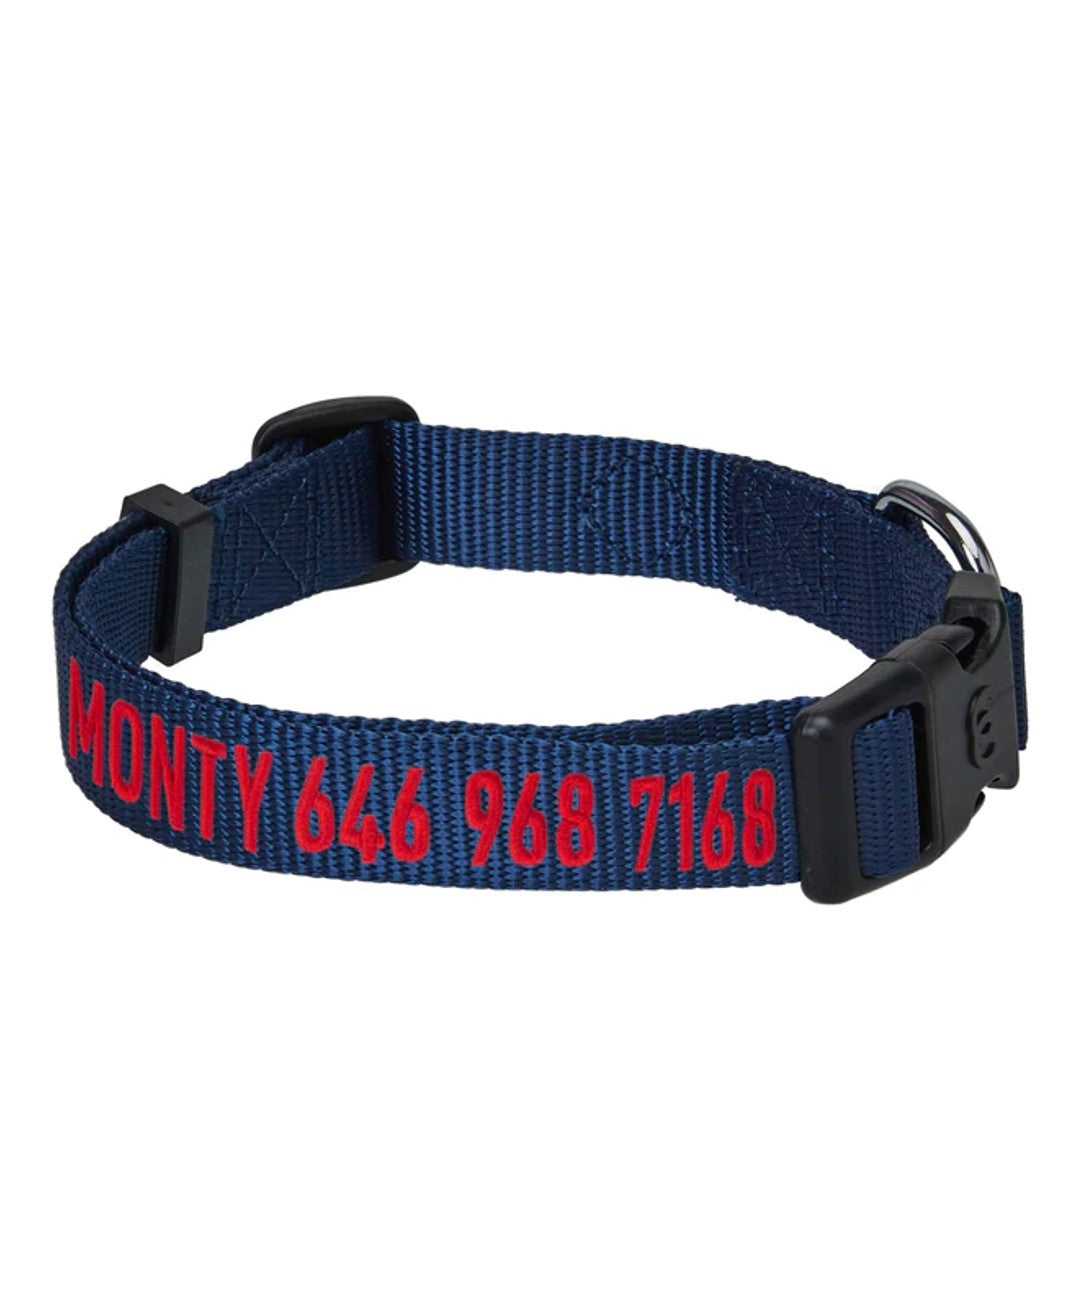 Blueberry Pet Personalized Classic Dog Collar Collar Blueberry Pet Navy S 